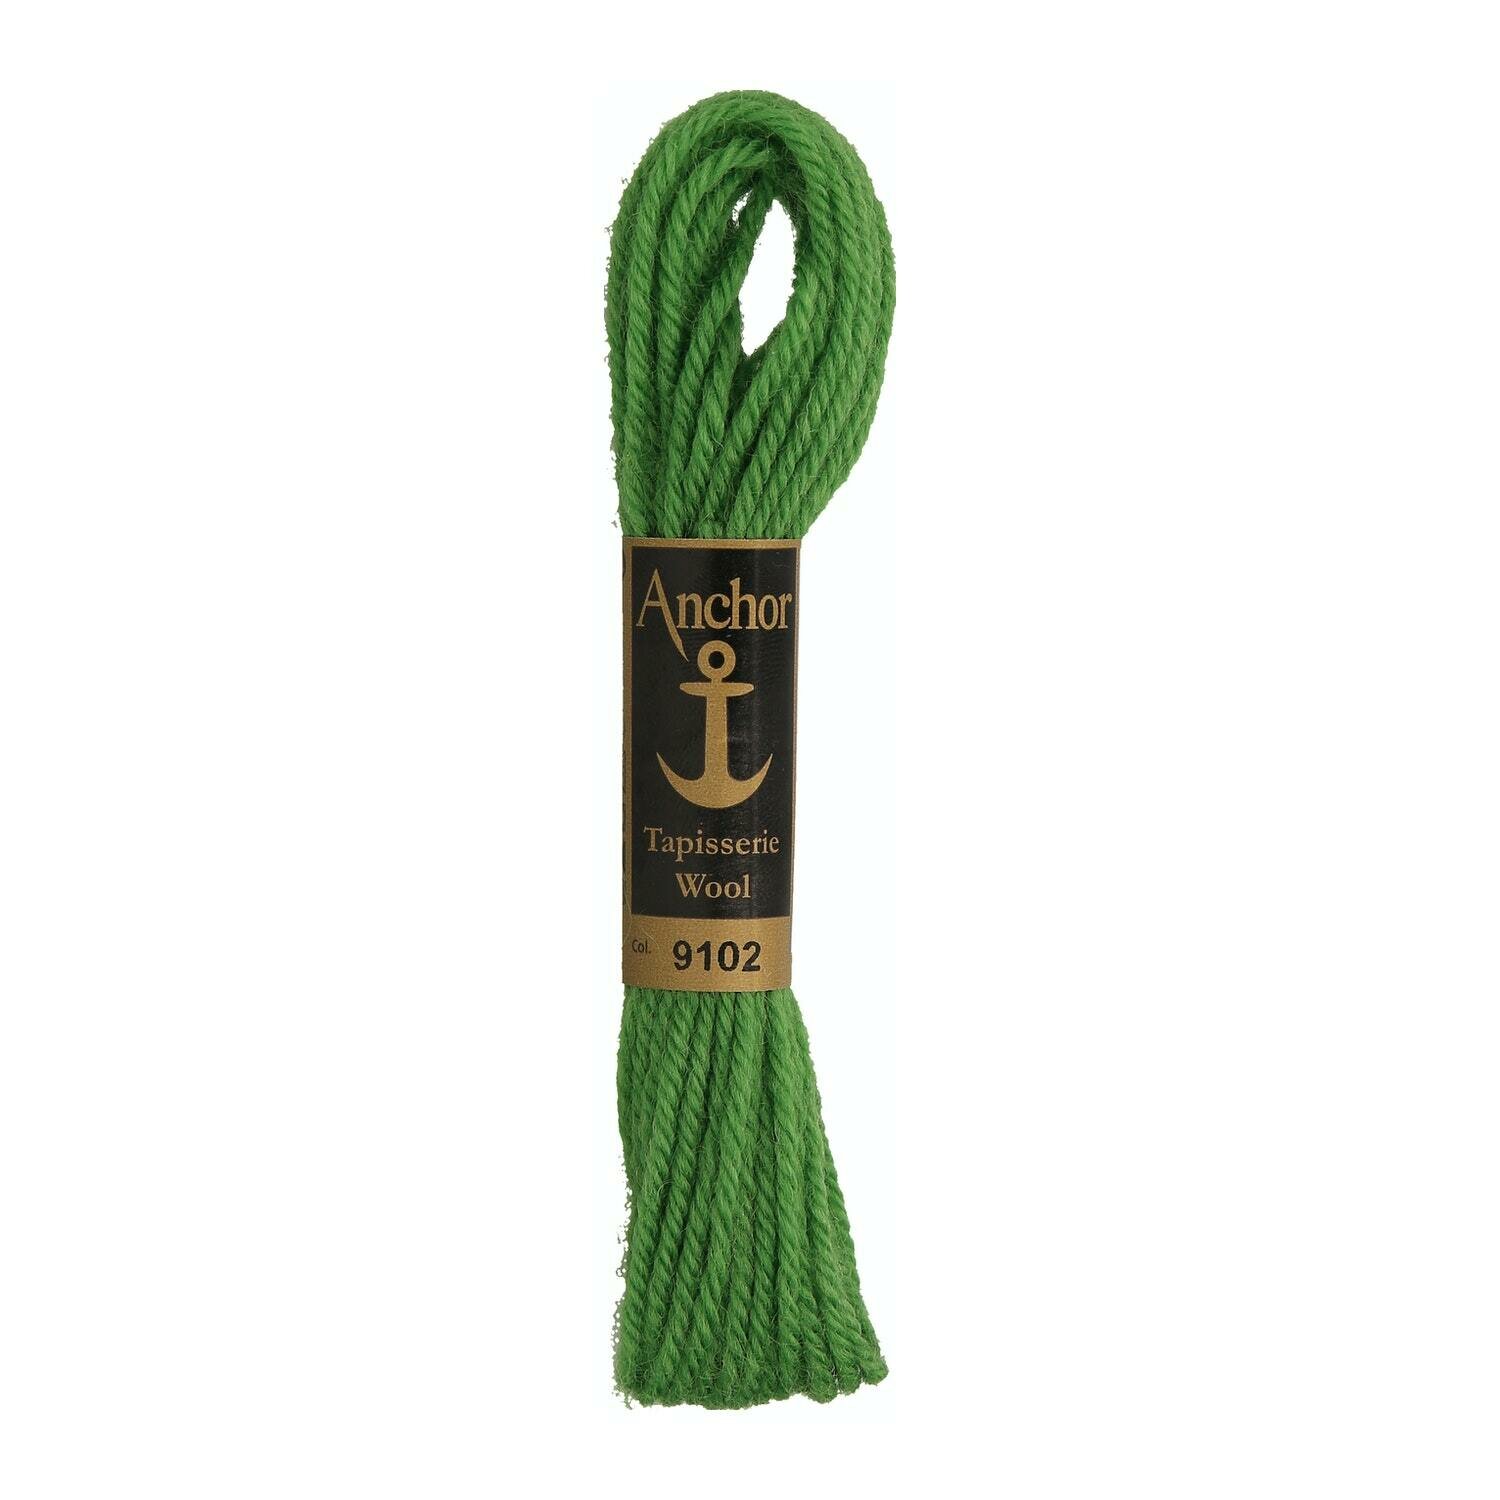 Anchor Tapisserie Wool # 09102